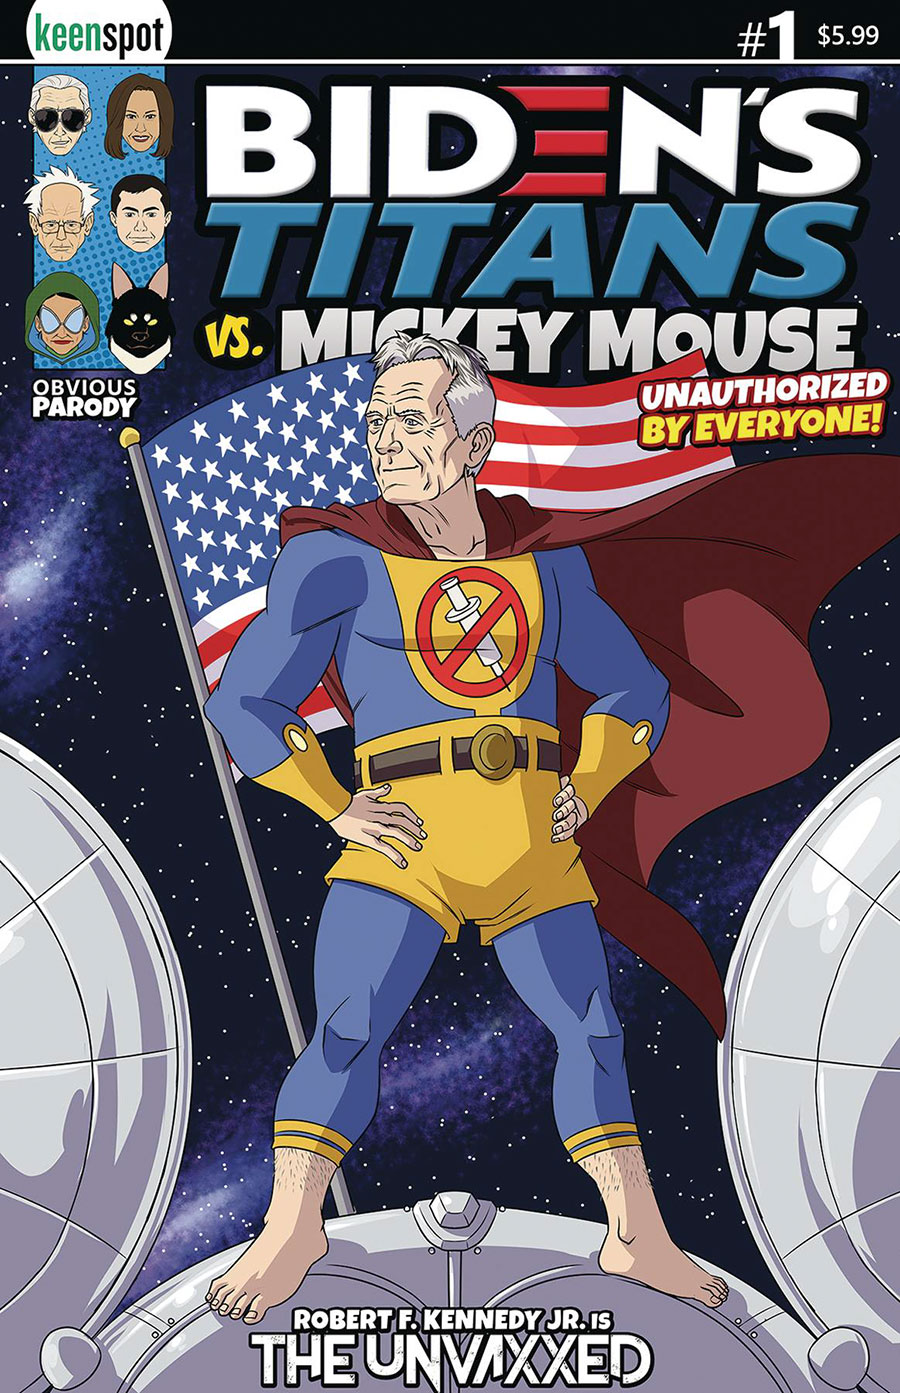 Bidens Titans vs Mickey Mouse (Unauthorized) #1 Cover C Variant Robert F Kennedy Jr The Unvaxxed Cover